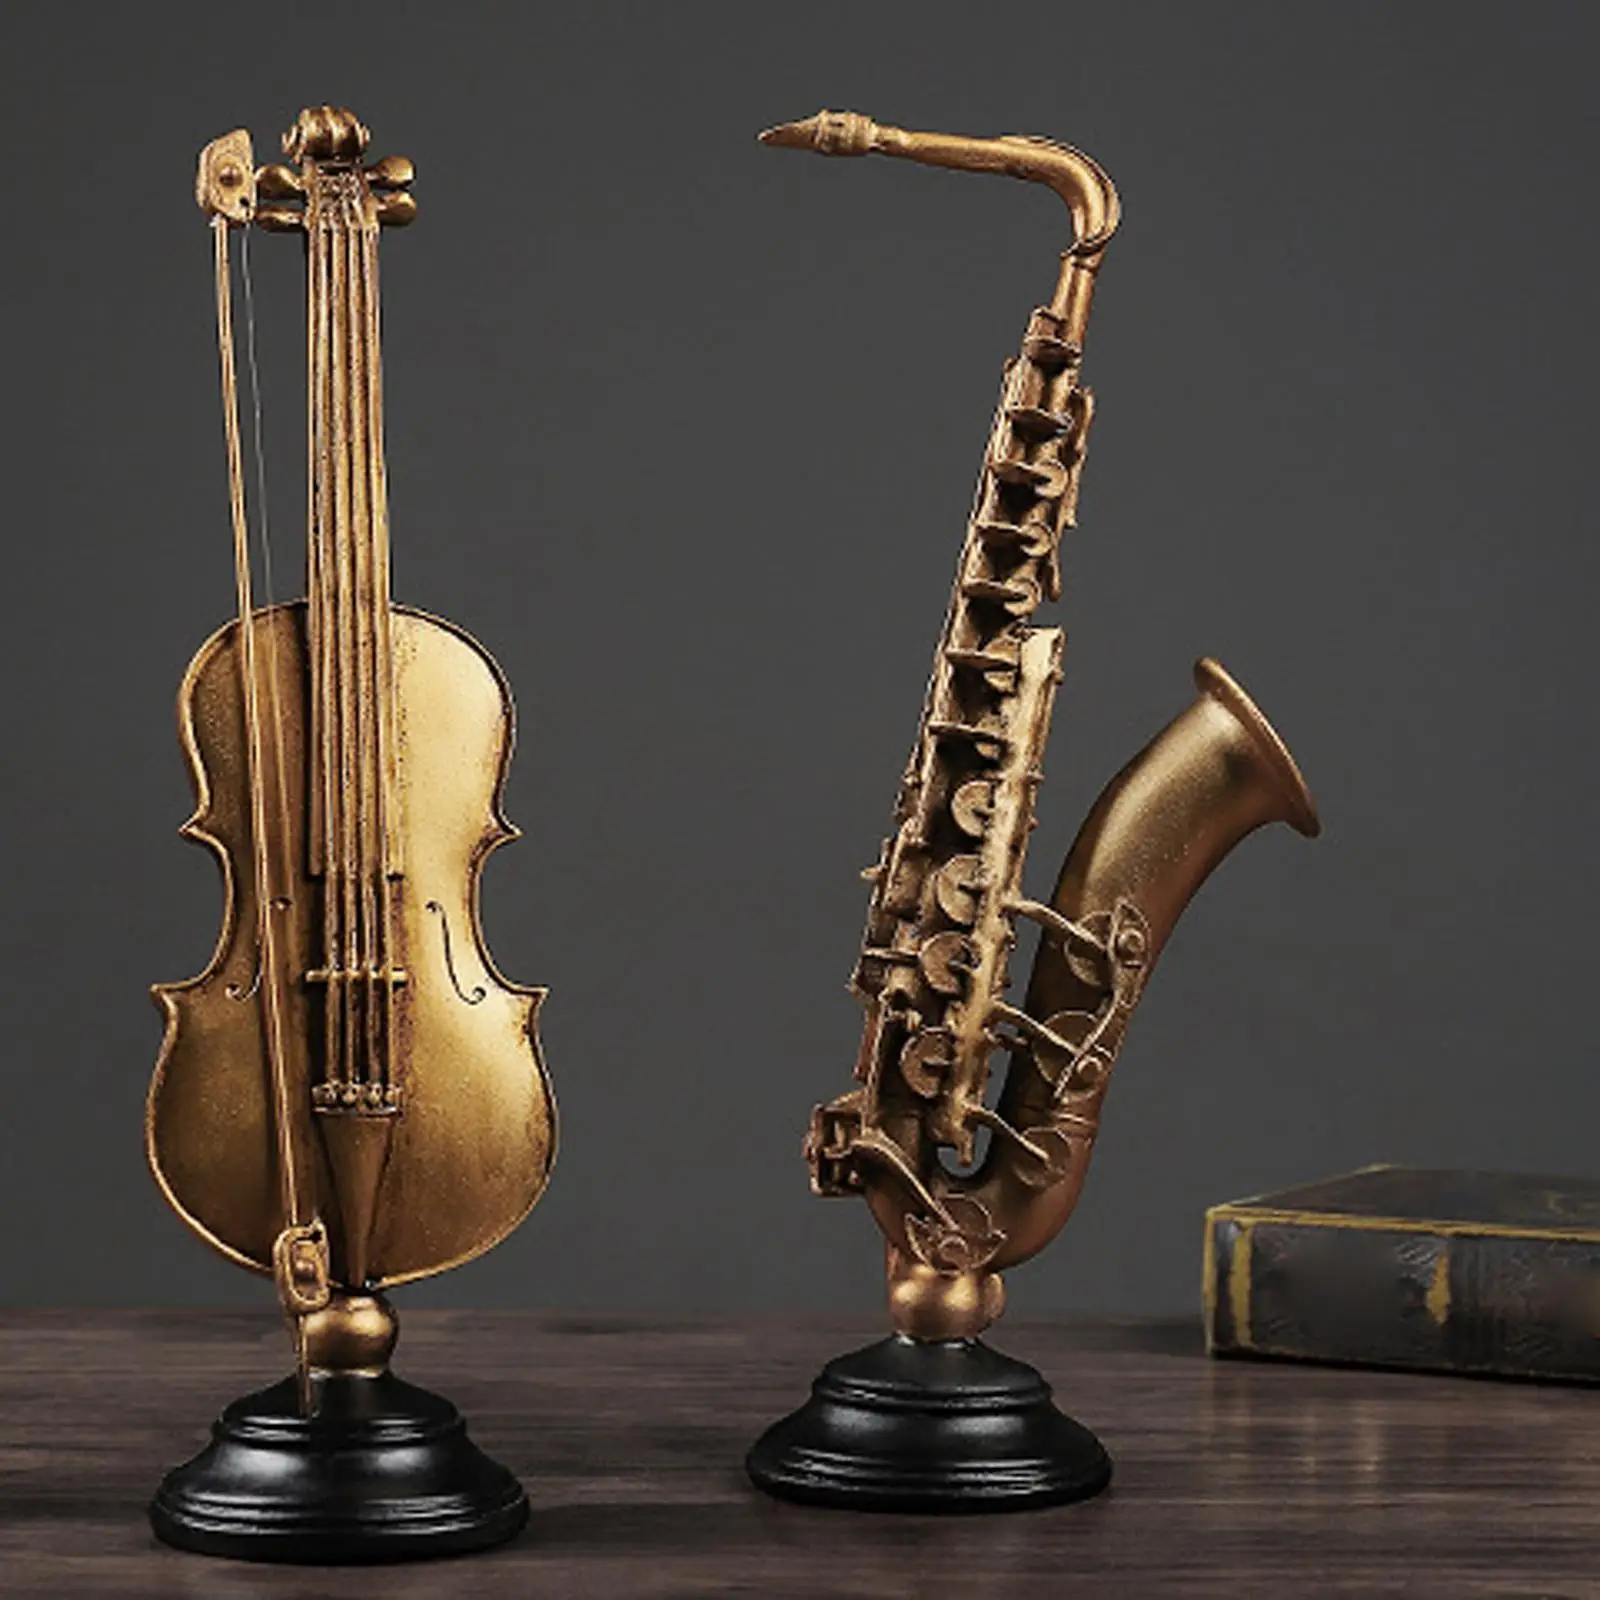 Violin Model Musical Instrument Model Collection Decorative Ornament Home Room Decoration With Gift Box